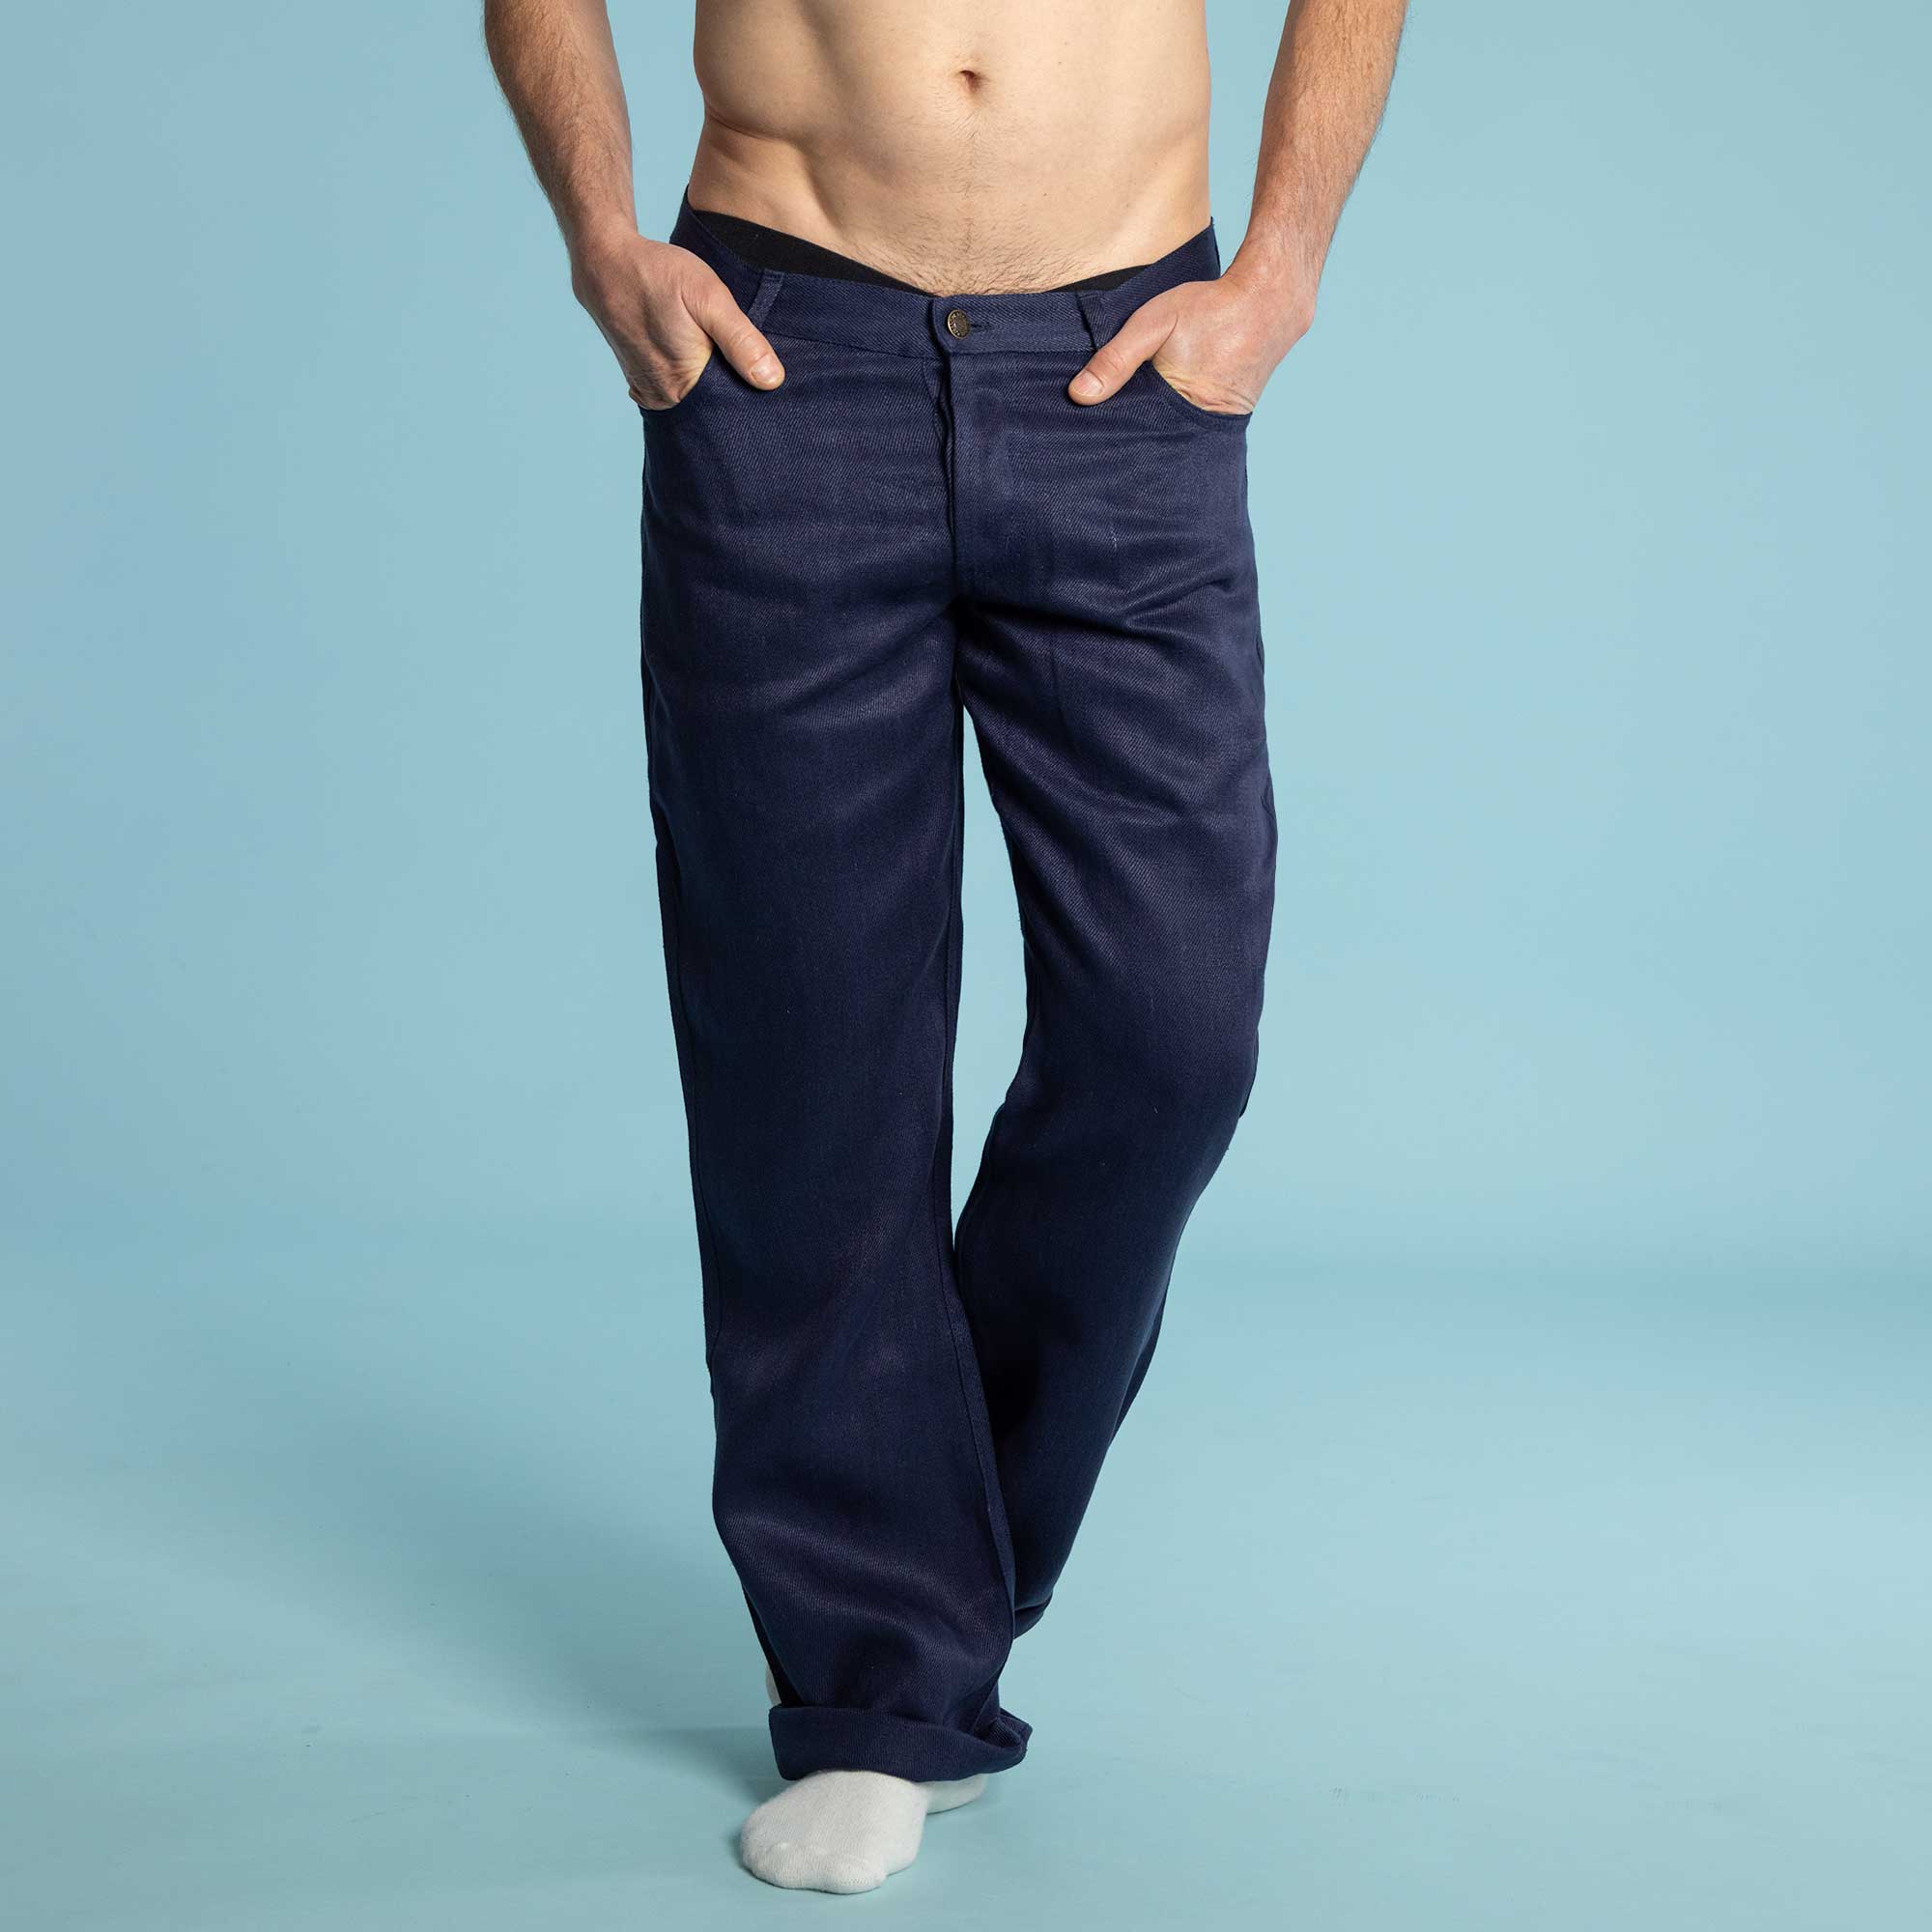 Roots Restore High Rise Flare Legging Pants in True Navy